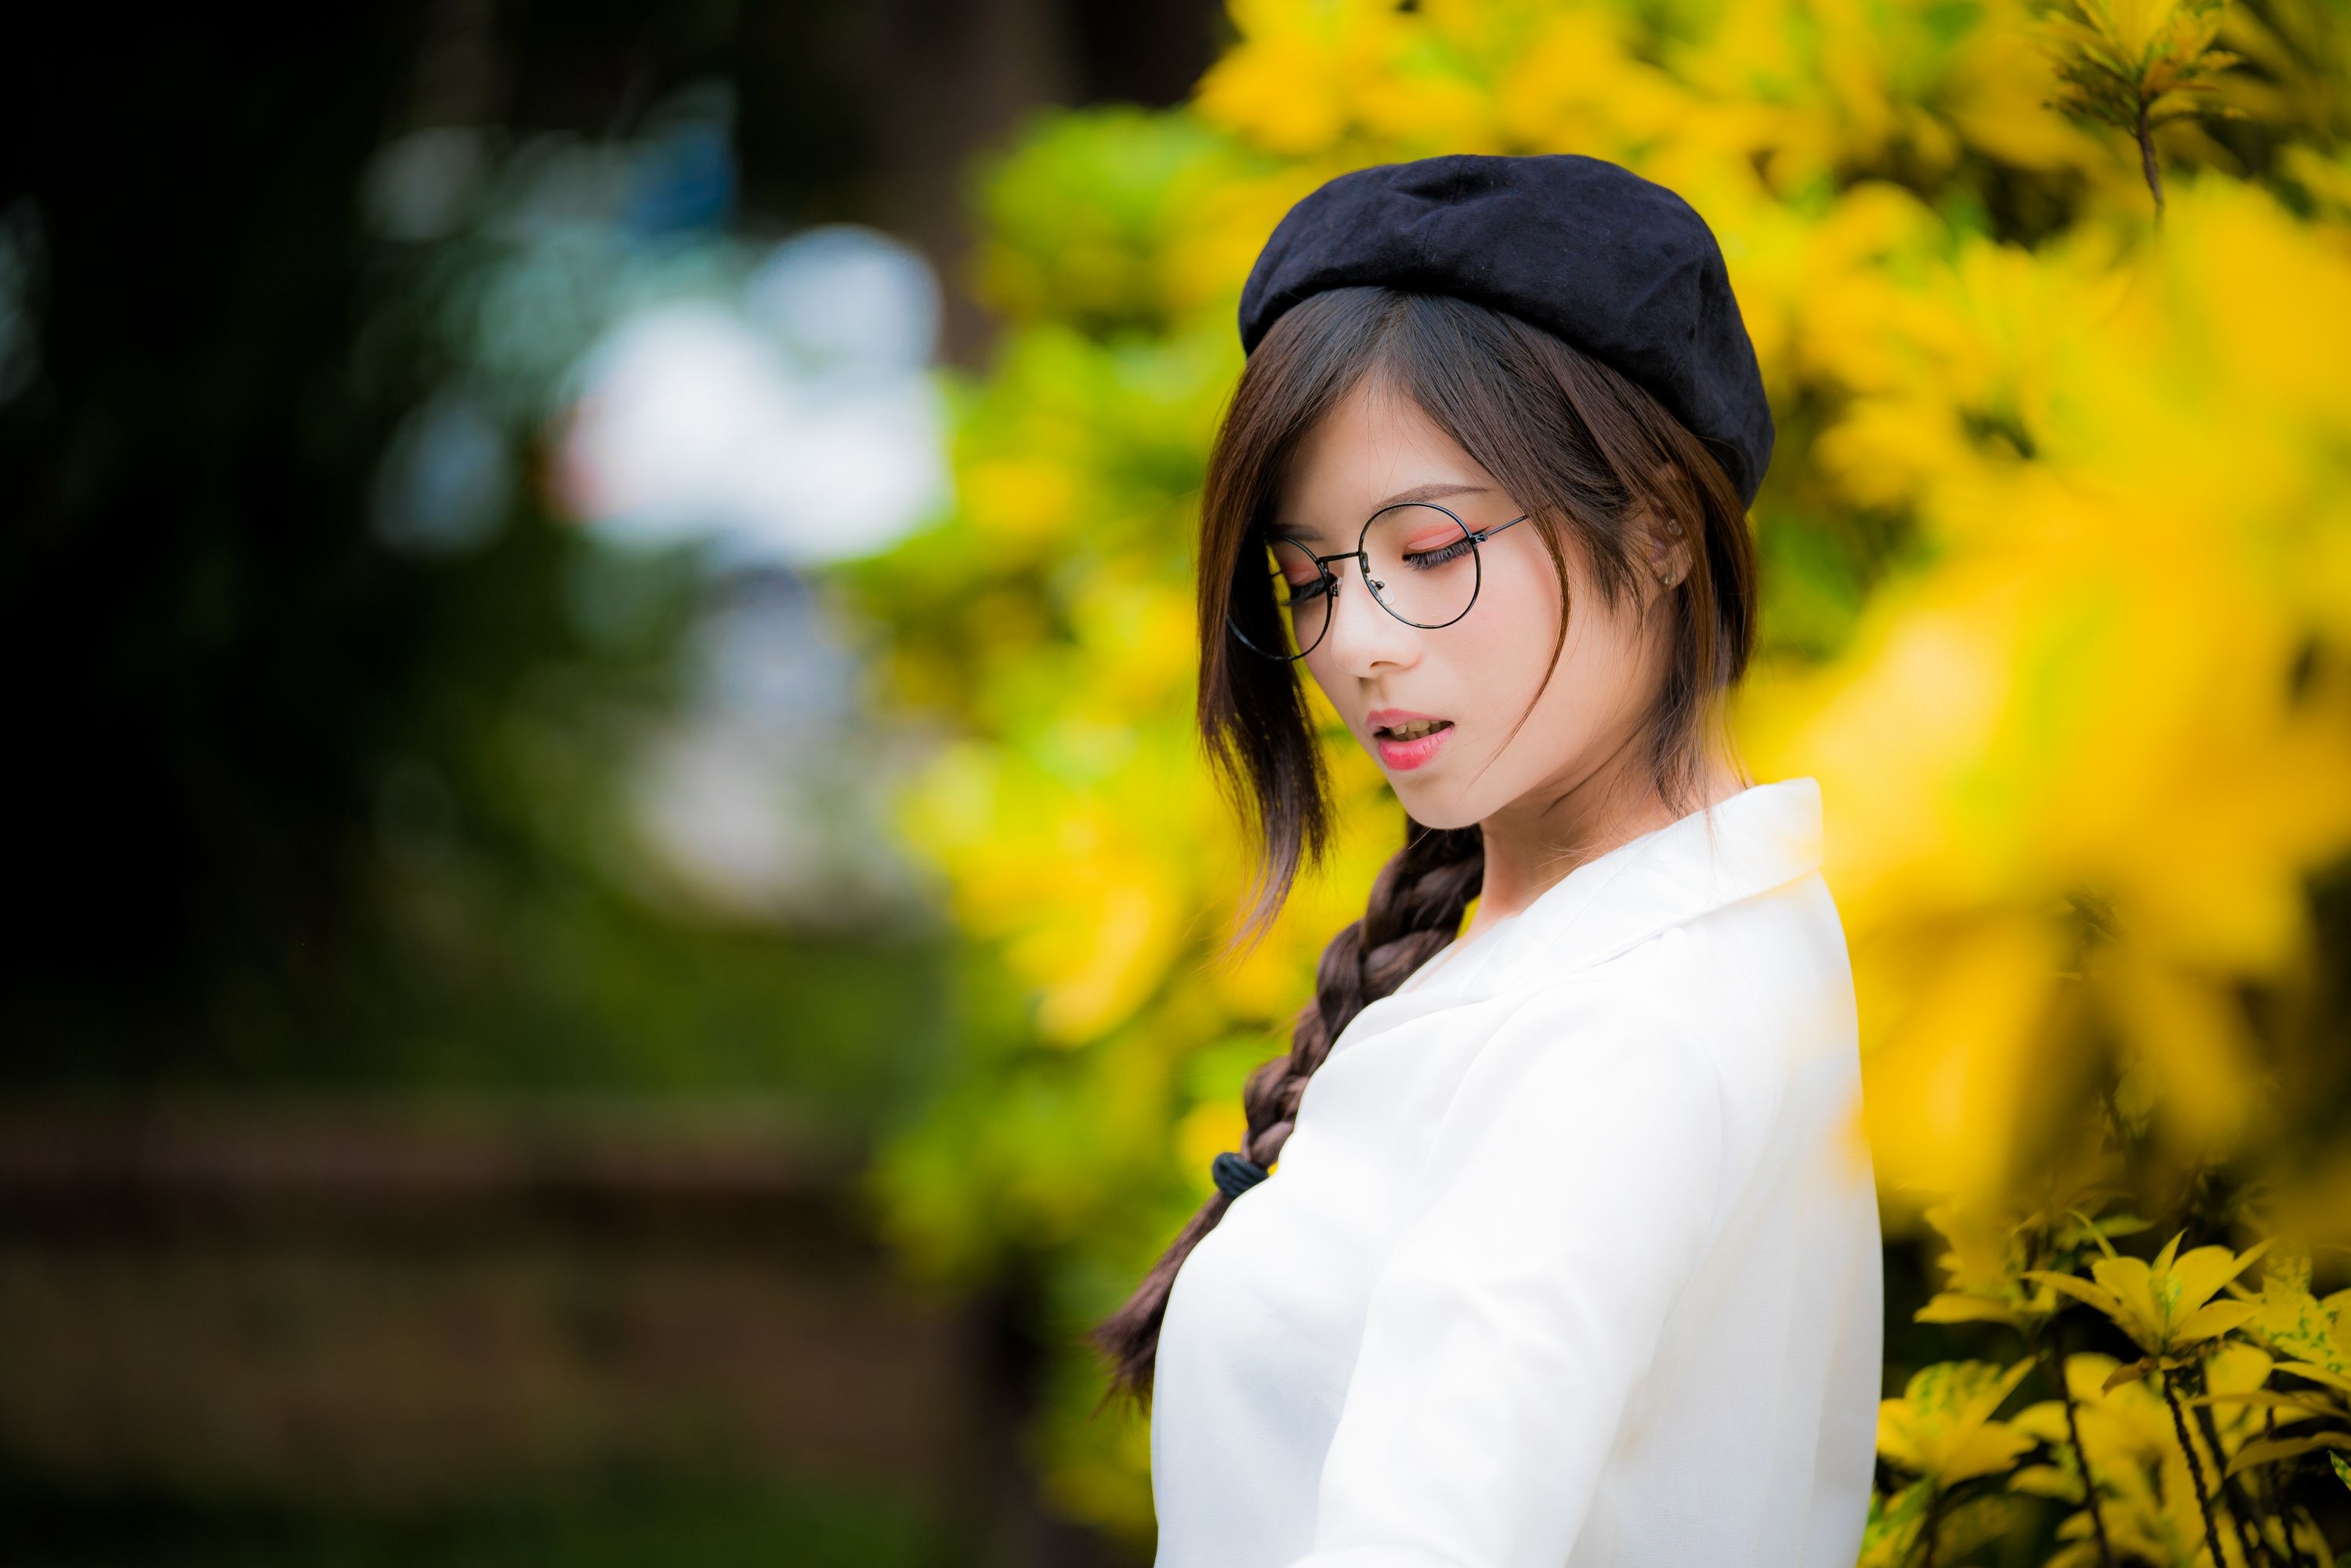 Asian girl with glasses and a black beret Desktop wallpaper 2560x1600